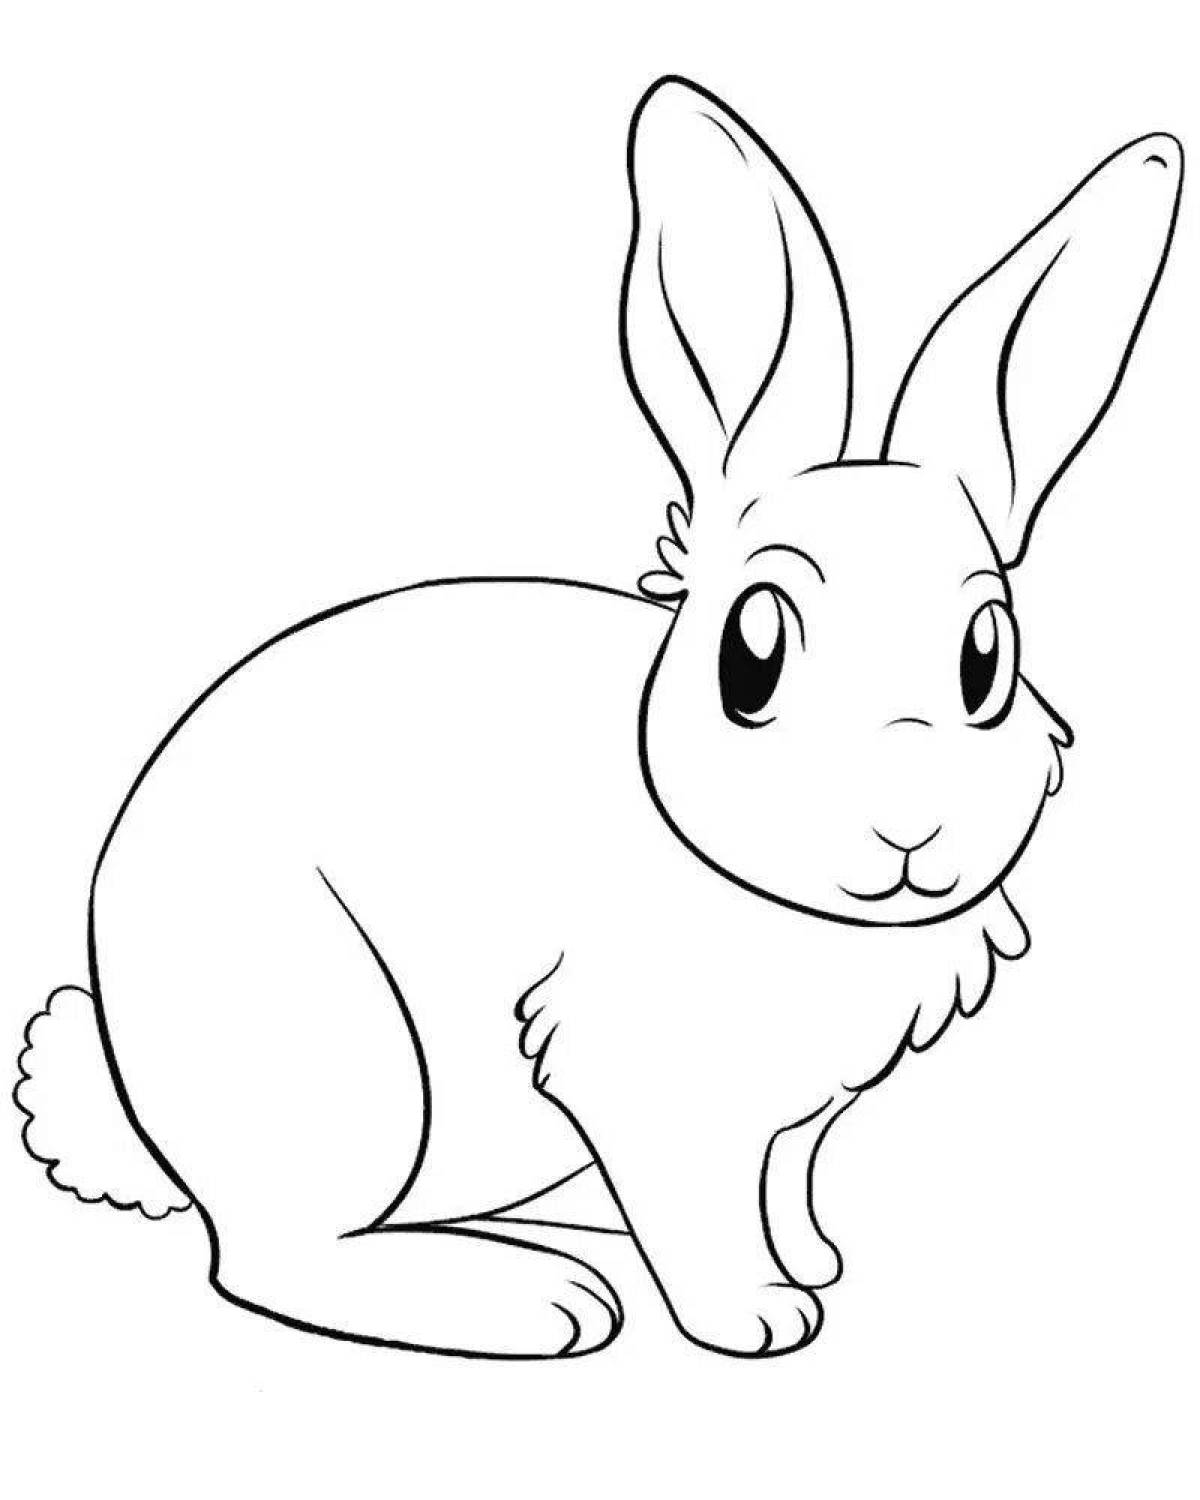 Playful bunny coloring page